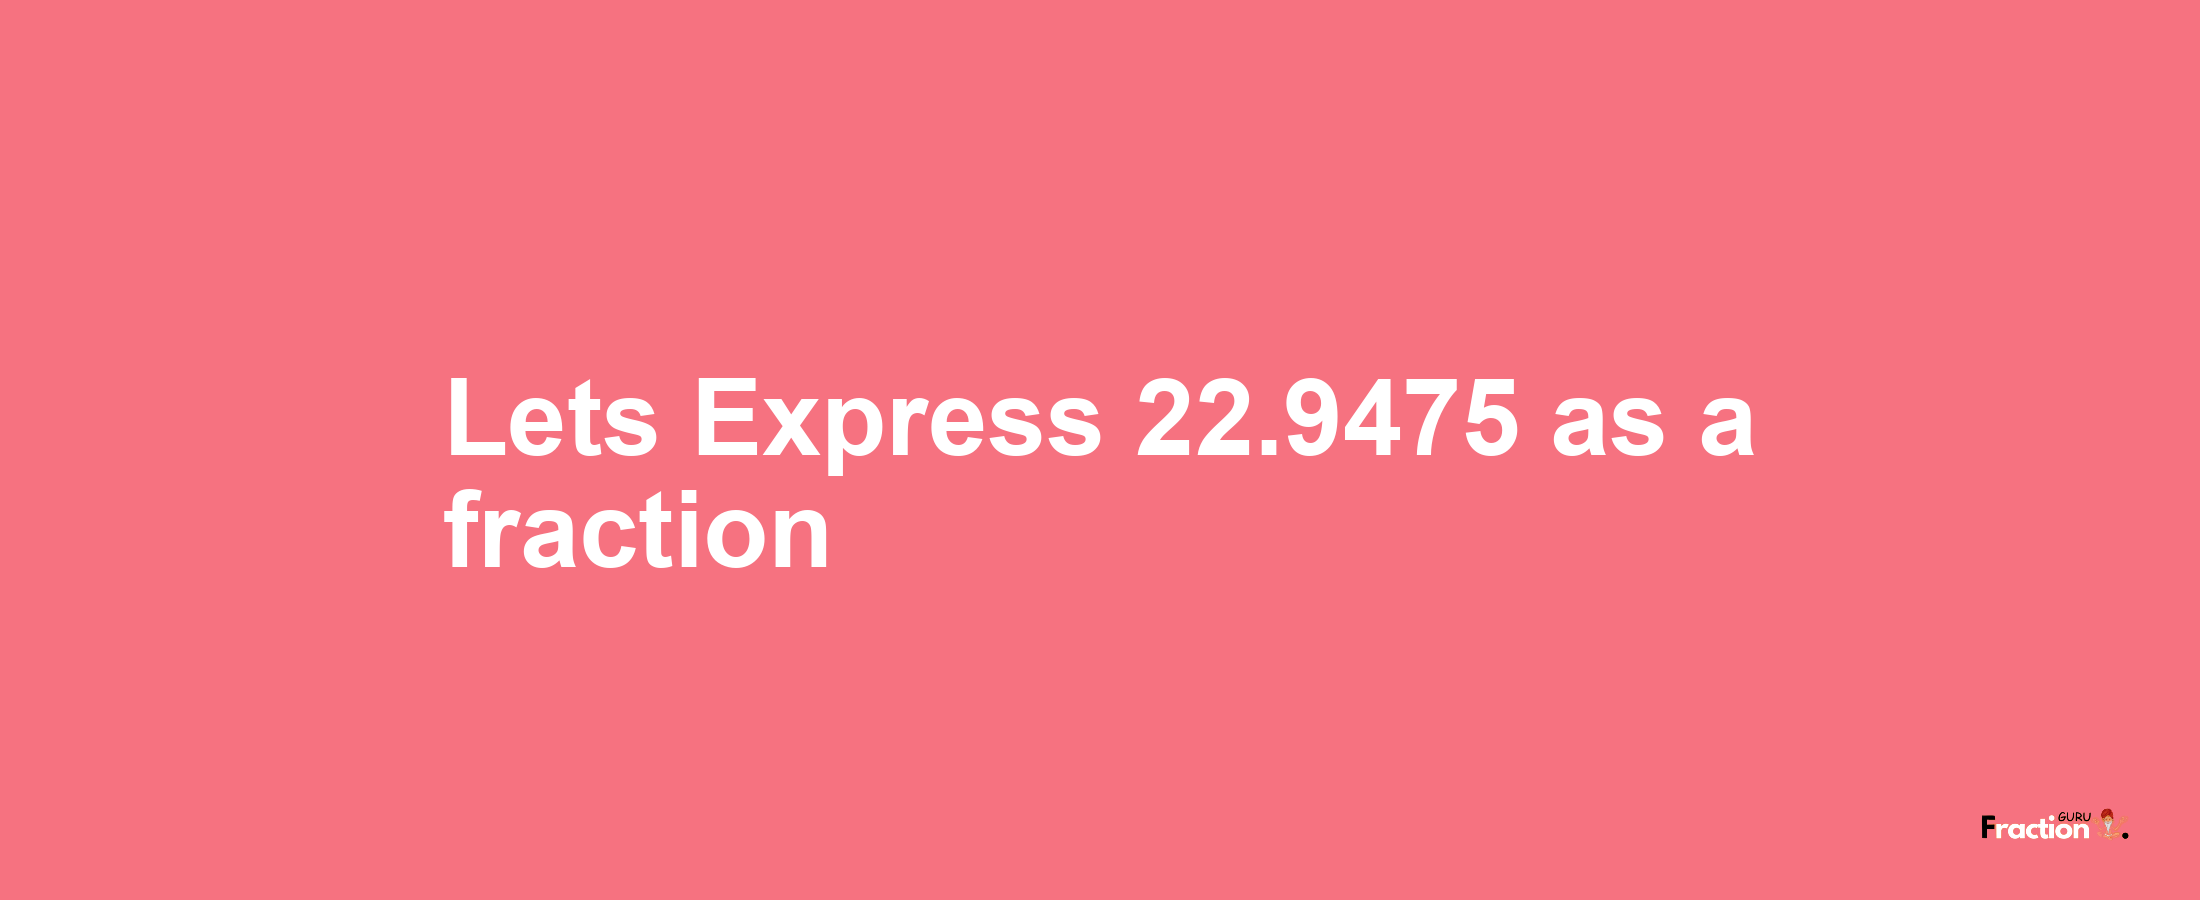 Lets Express 22.9475 as afraction